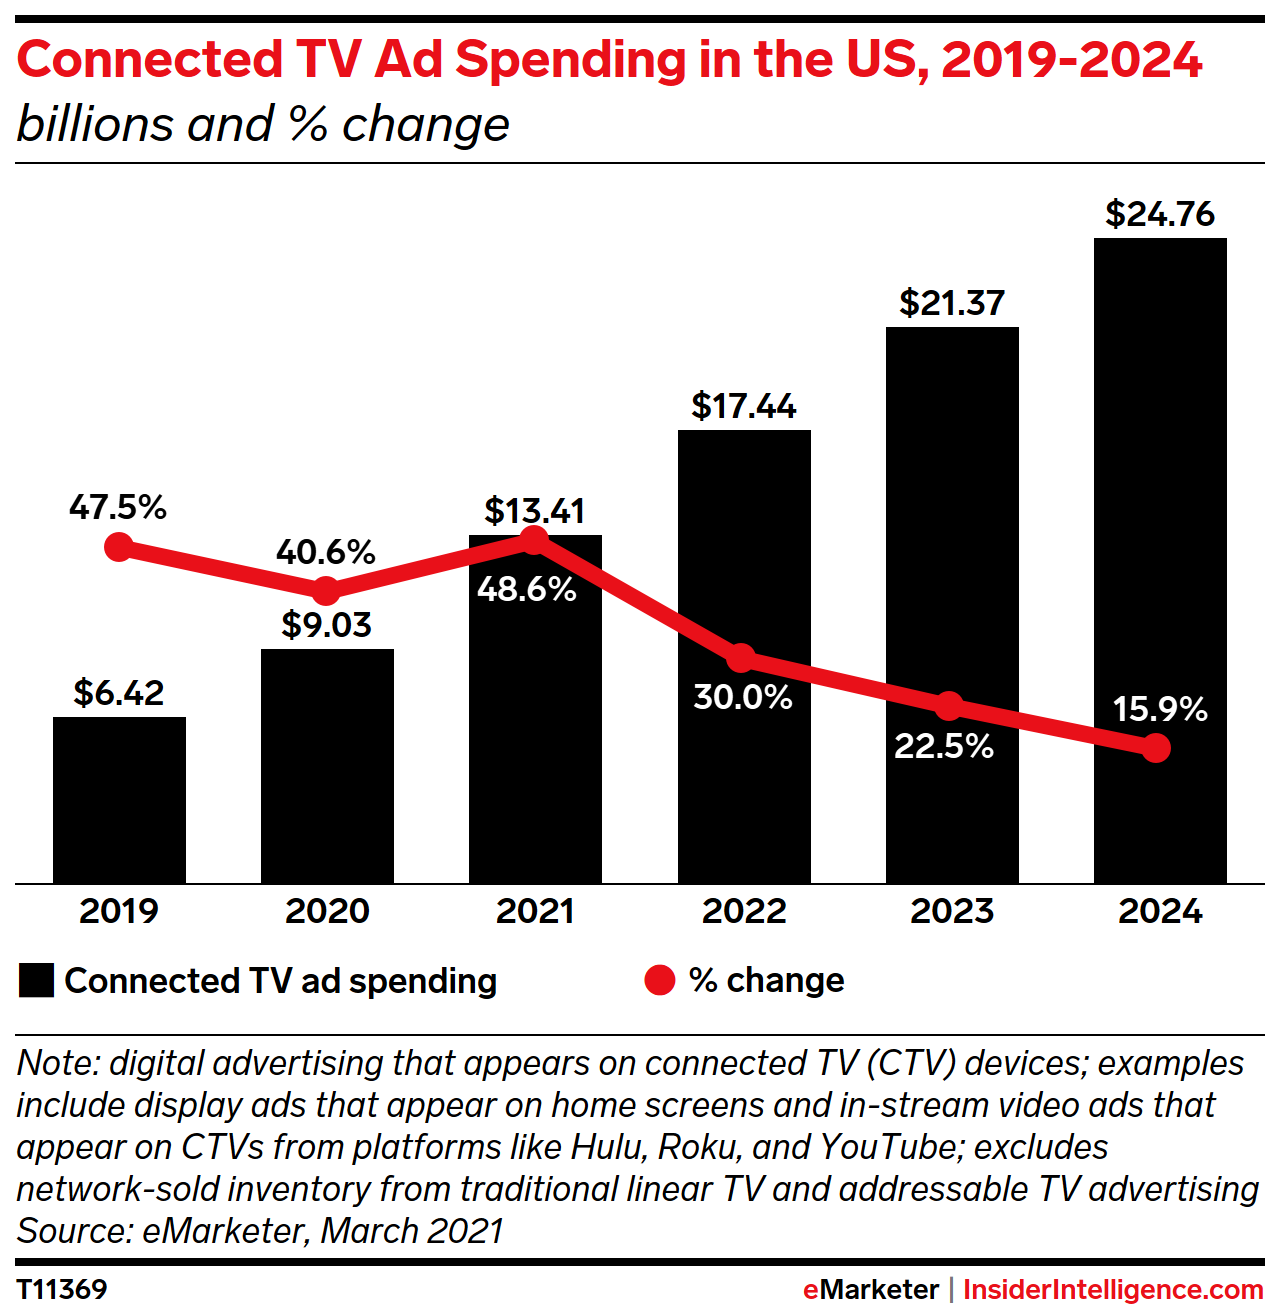 Connected TV Ad Spending in the US 2019-2024